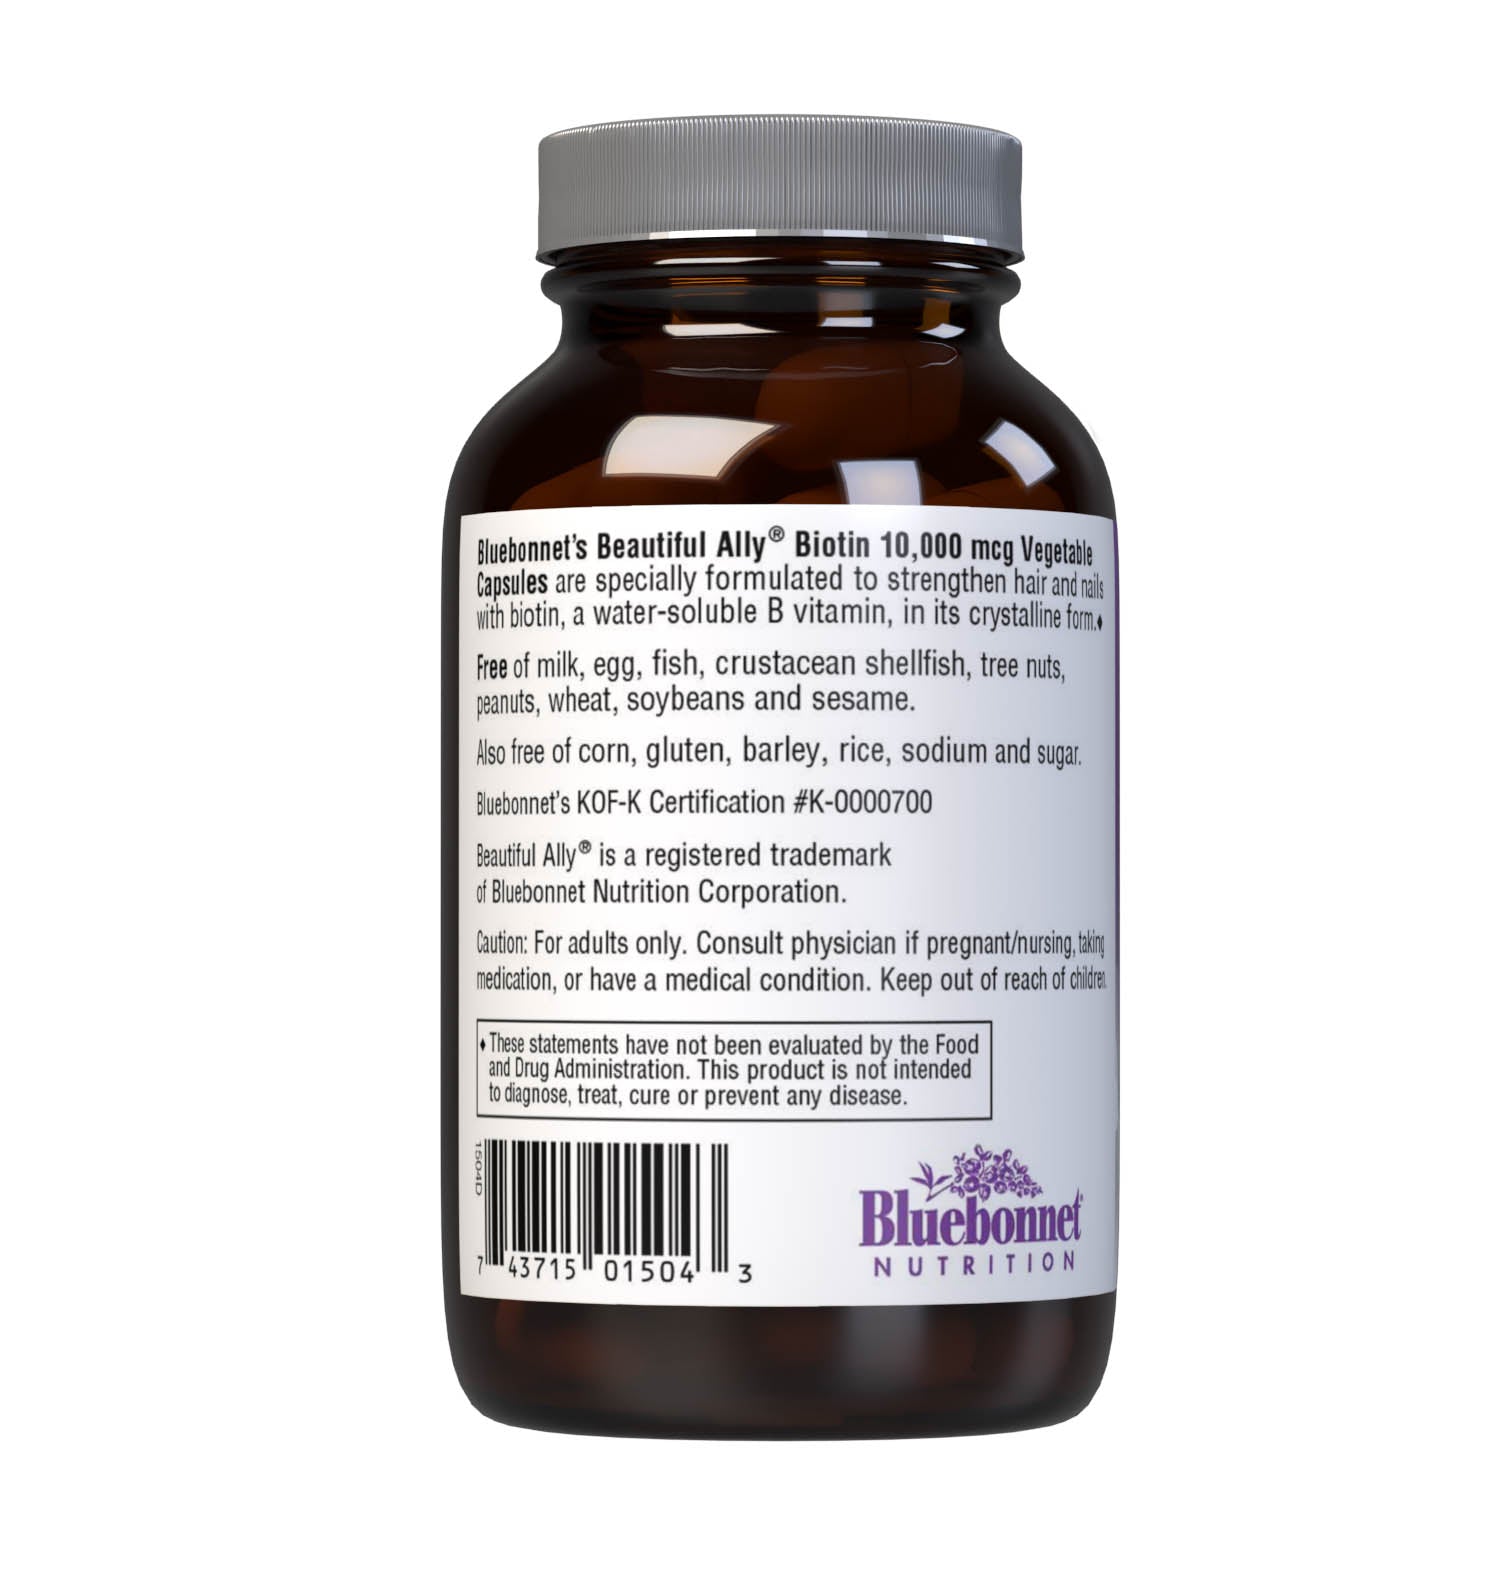 Bluebonnet’s Beautiful Ally Biotin 10,000 mcg 90 Vegetable Capsules are specially formulated to help strengthen hair and nails with yeast-free biotin, a water-soluble B vitamin, in its crystalline form. Description panel. #size_90 count